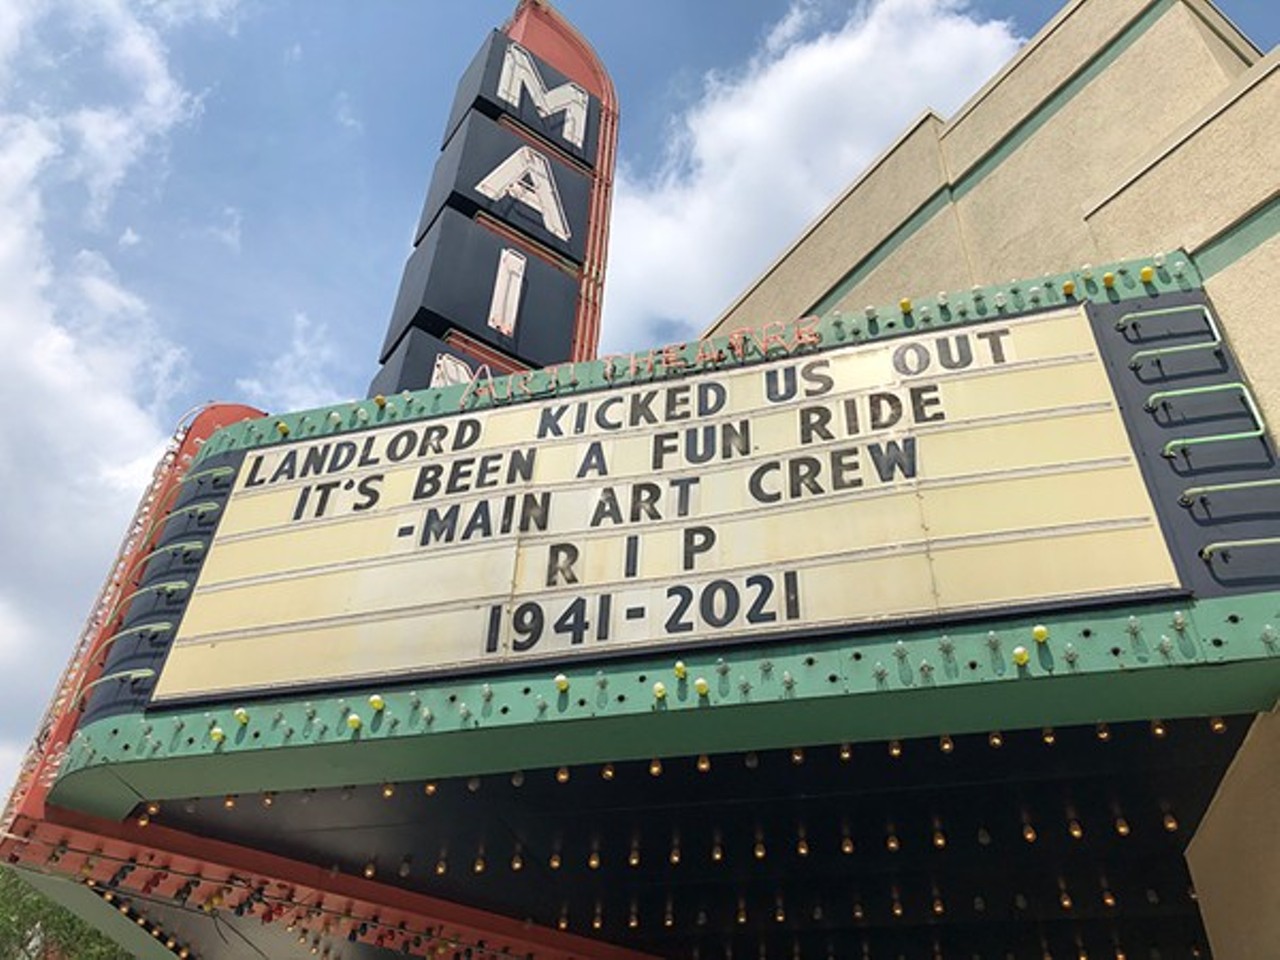 
Main Art Theatre&#146;s landlord: Royal Oak&#146;s long-standing indie theatre abruptly shuts down, with the message &#147;Landlord kicked us out&#148; on its marquee. Paul Glantz, who owns the next-door Emagine cinema complex, shows no interest in acquiring the 80-year-old theater, ending an era. 
Photo by Lee DeVito